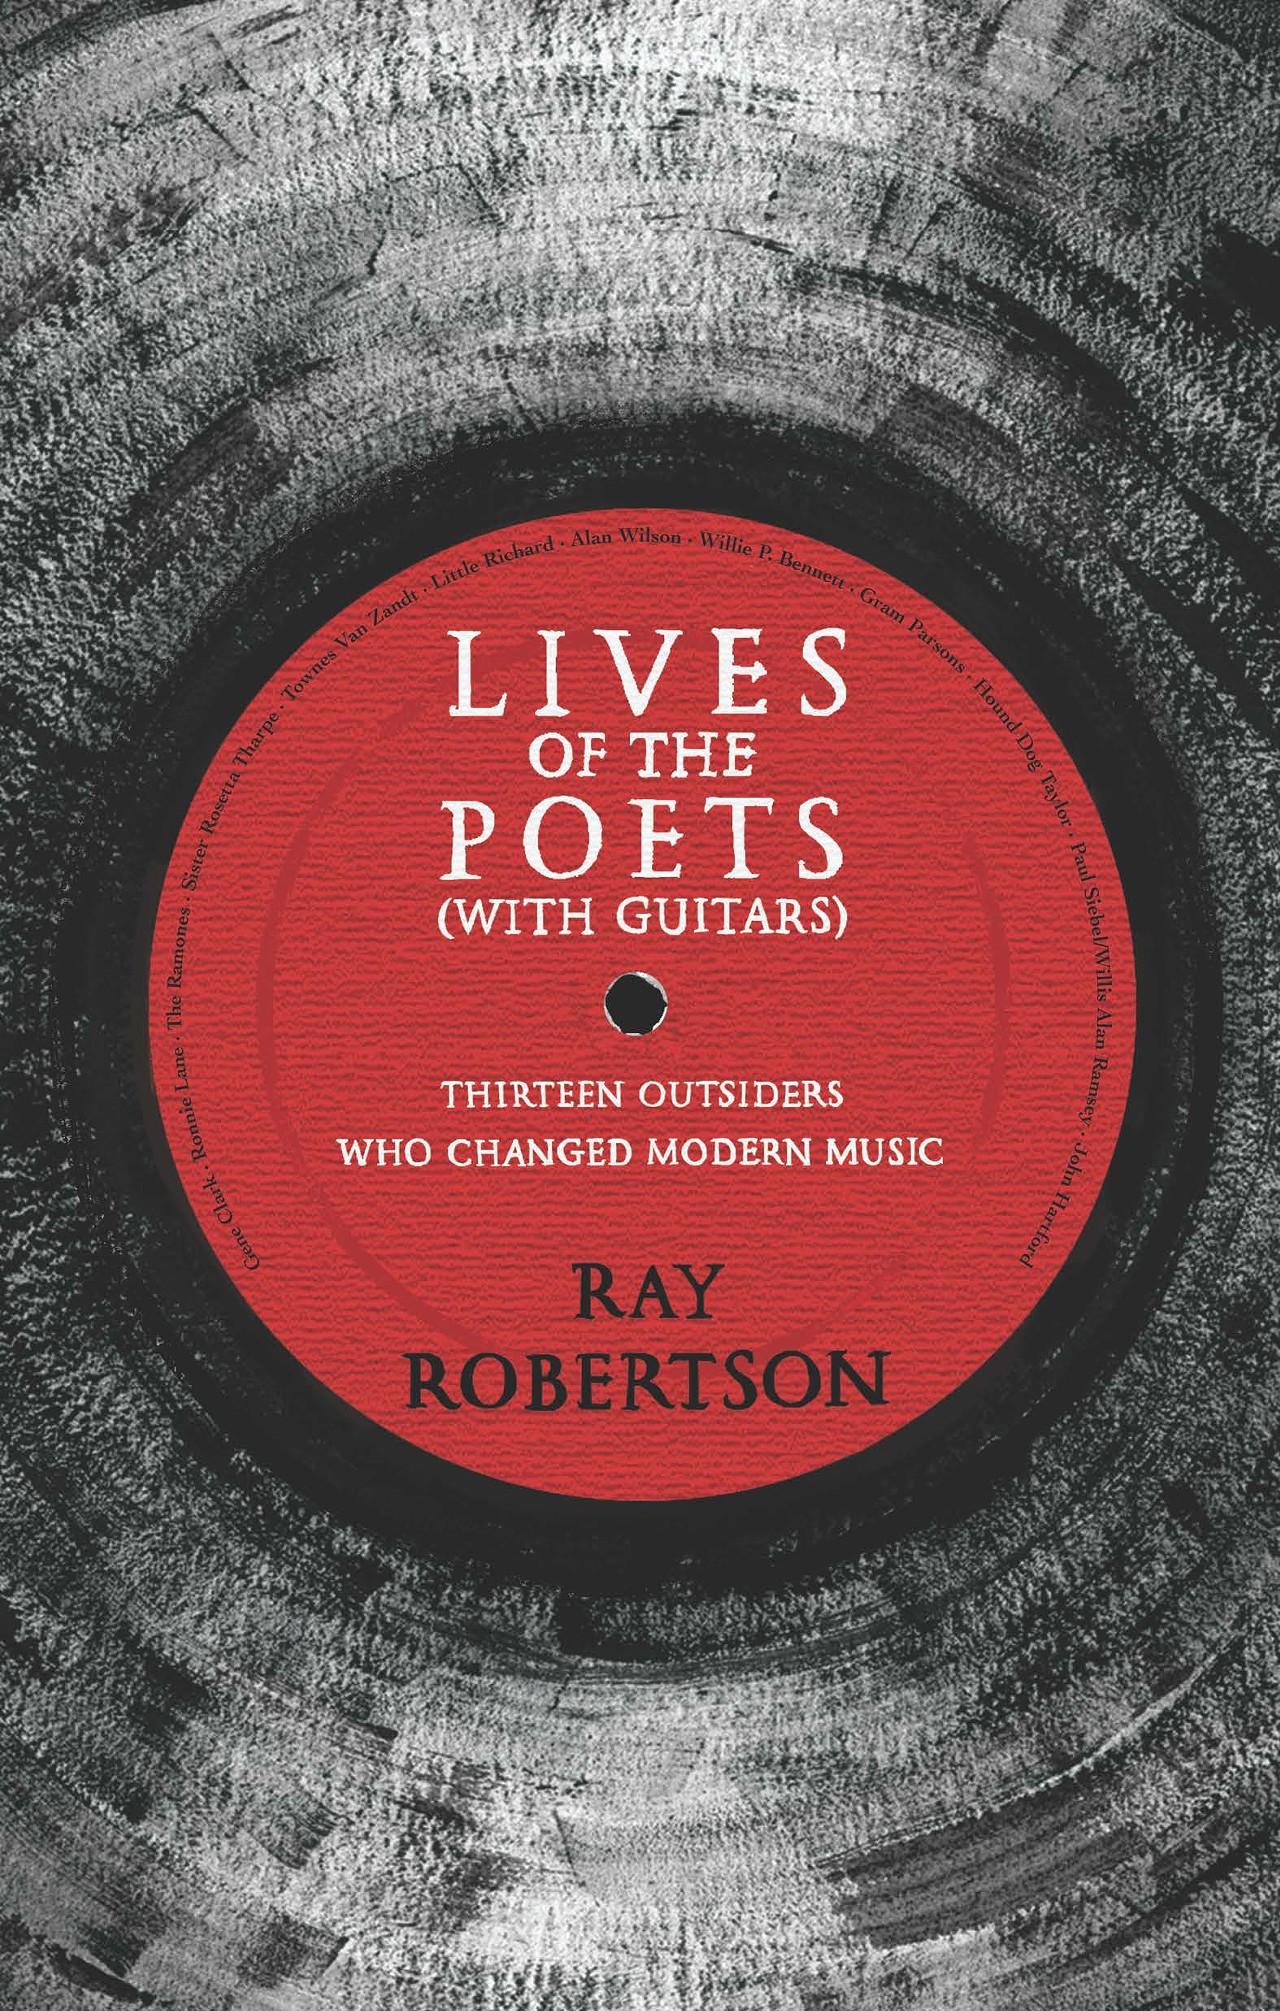 Saturday, 6/4
&#145;Lives of the Poets
(With Guitars)&#146;
@ Ditto Ditto
While the idea that any singer-songwriters might also be called poets is quaint as heck in 2016, Ray Robertson is such a strong writer that his musings on &#147;13 outsiders who changed modern music&#148; carries the premise through with humor and (most importantly) irreverence. That&#146;s right, this is a book reading, from an already-acclaimed book about such heroes from the dark end of the street as Townes Van Zandt, Ronnie Lane, Rosetta Tharpe, and the Ramones. It&#146;s not an average reading though; Danny Kroha, Kelly Caldwell, Aran Ruth, and others will sing songs by those poet-people.
Starts around 5 p.m.; 1548 Trumbull Ave., Detroit; dittoditto.org; Free, but maybe drop by with a few beverages to share.